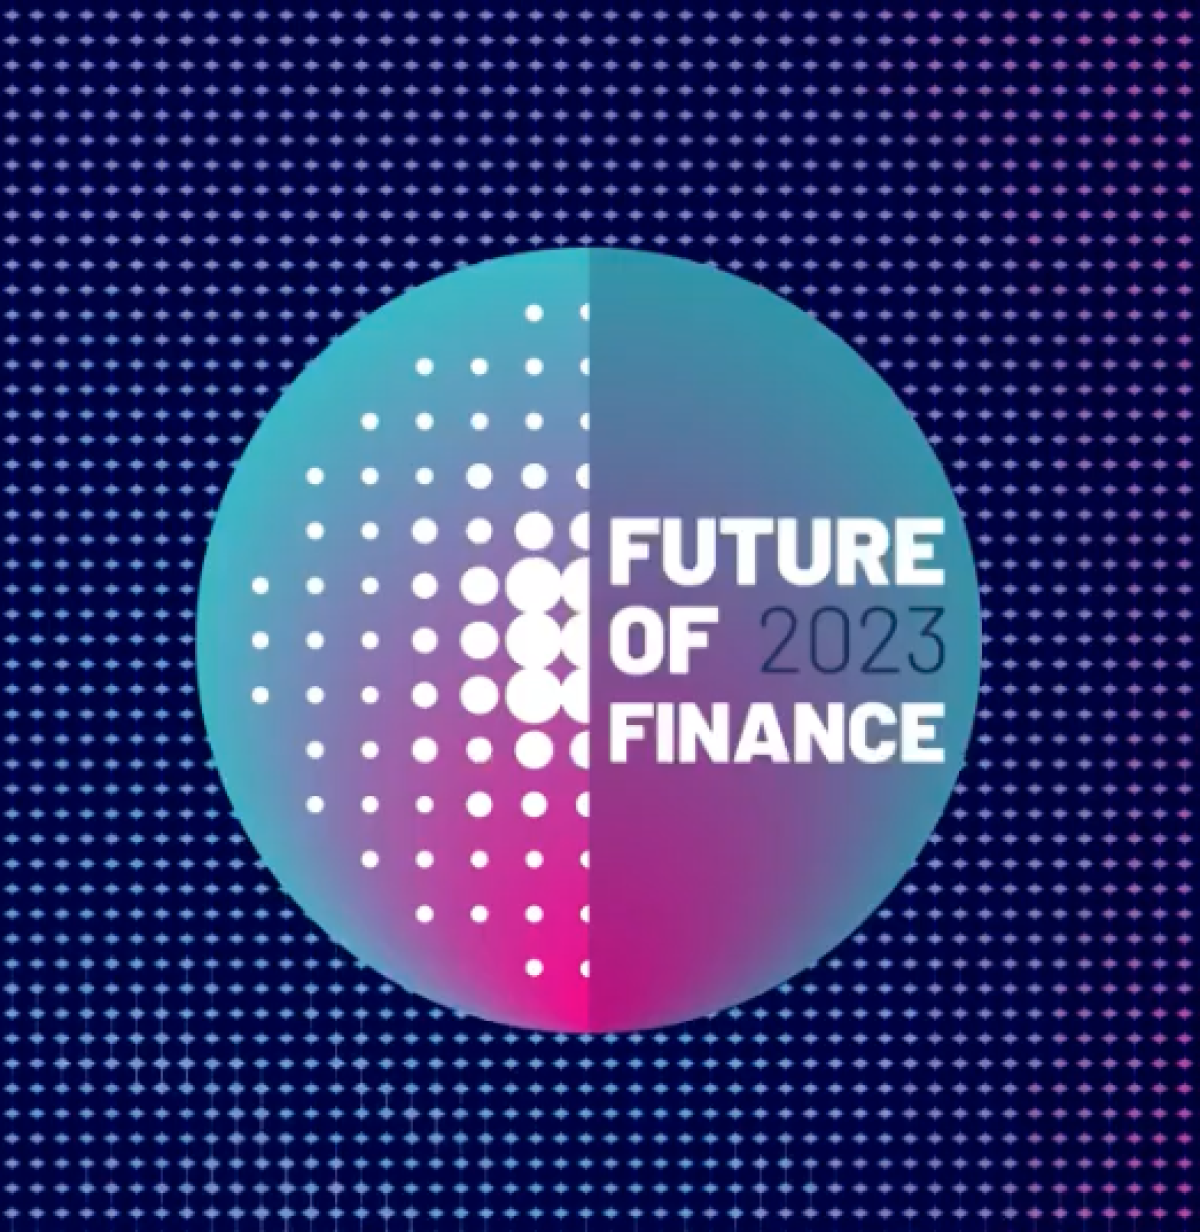 Be early to the future of finance